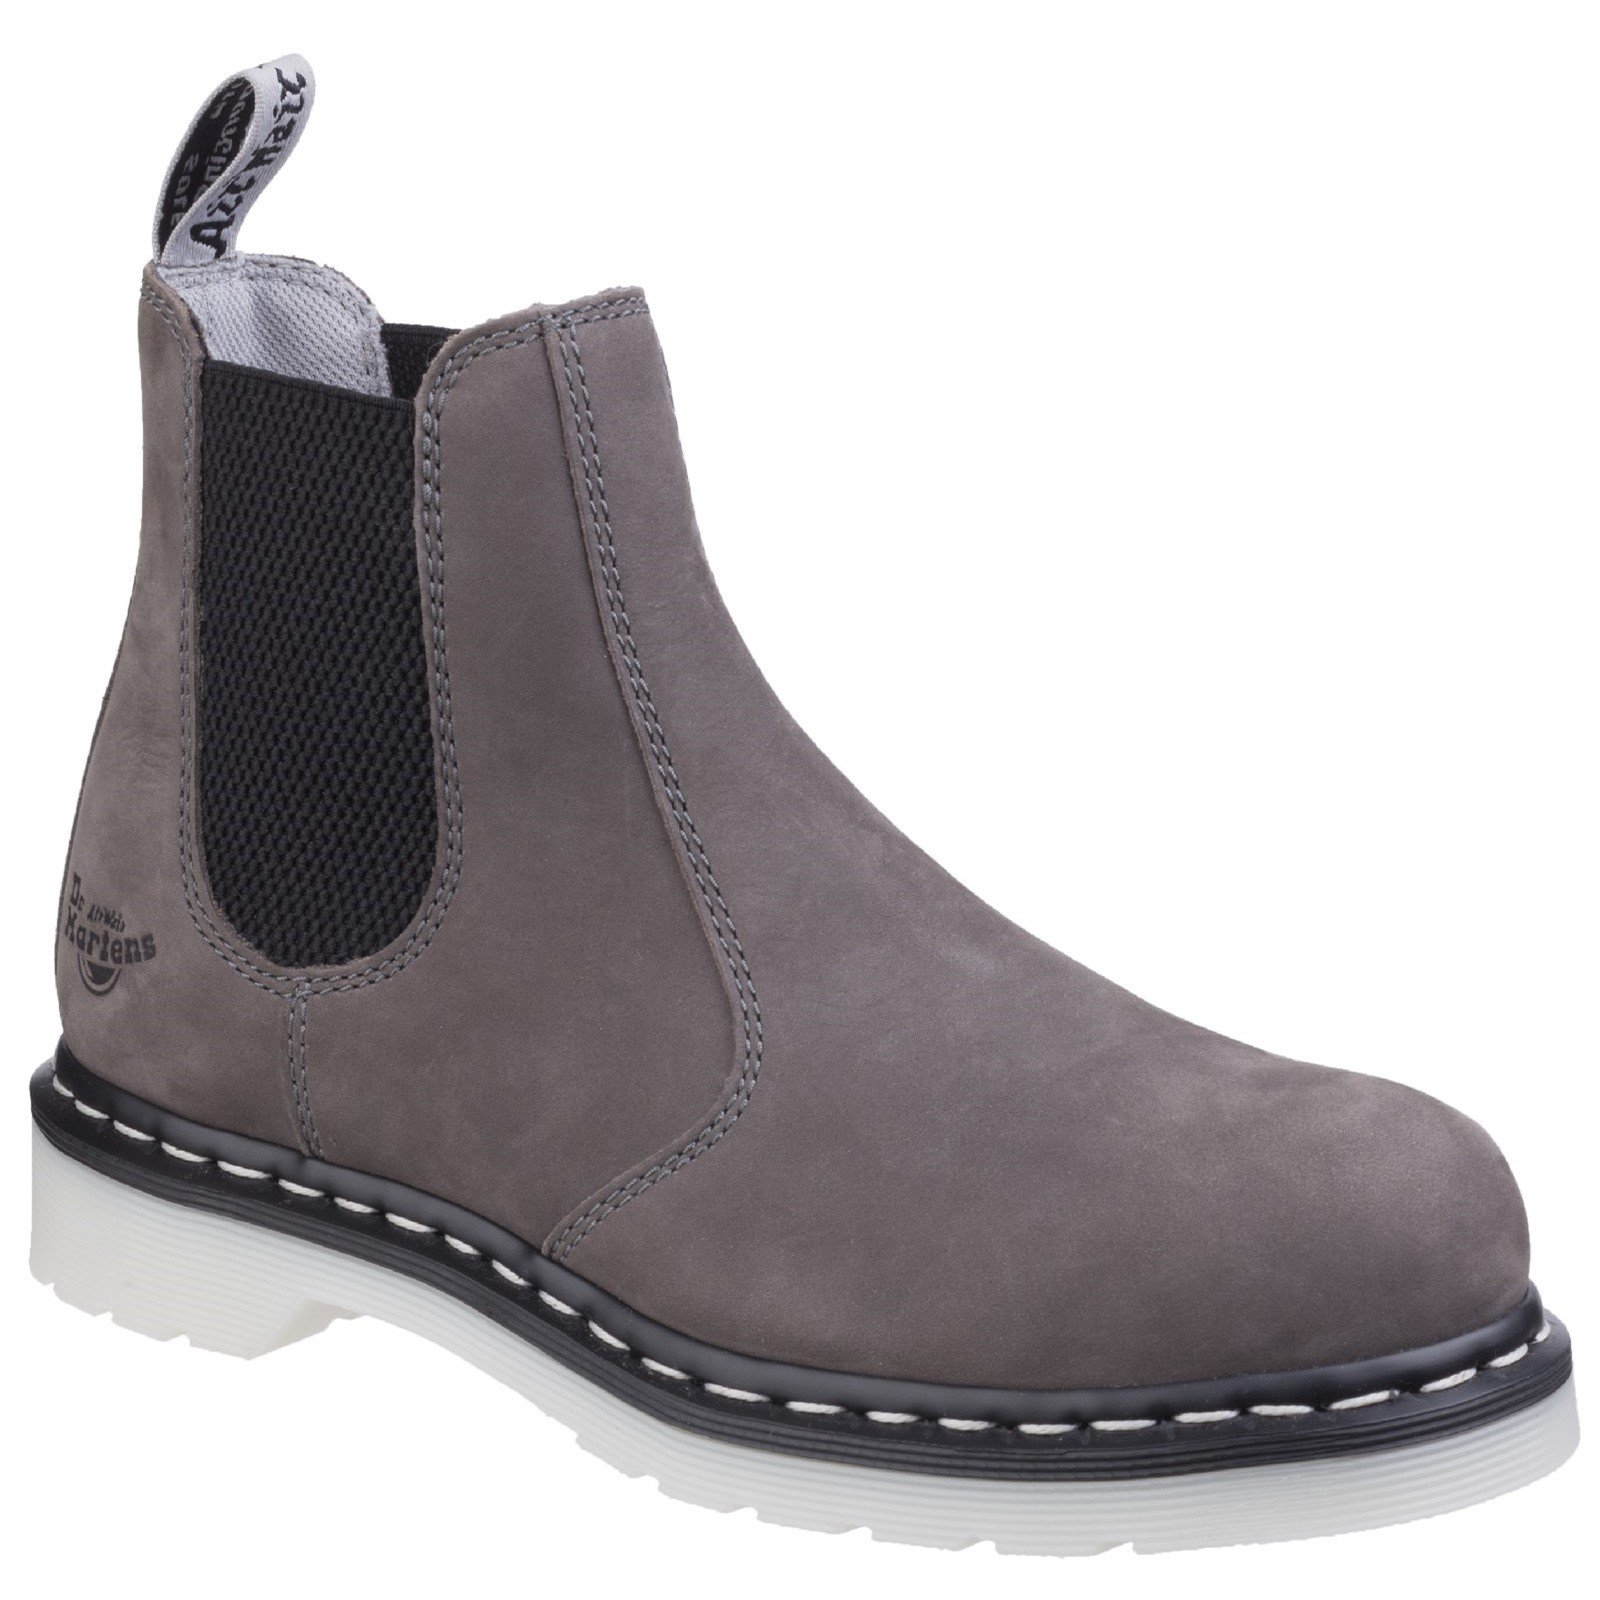 Dr Martens Women's Arbor Elastic Safety Boot Various Colours 29517 - Grey Wind River 5